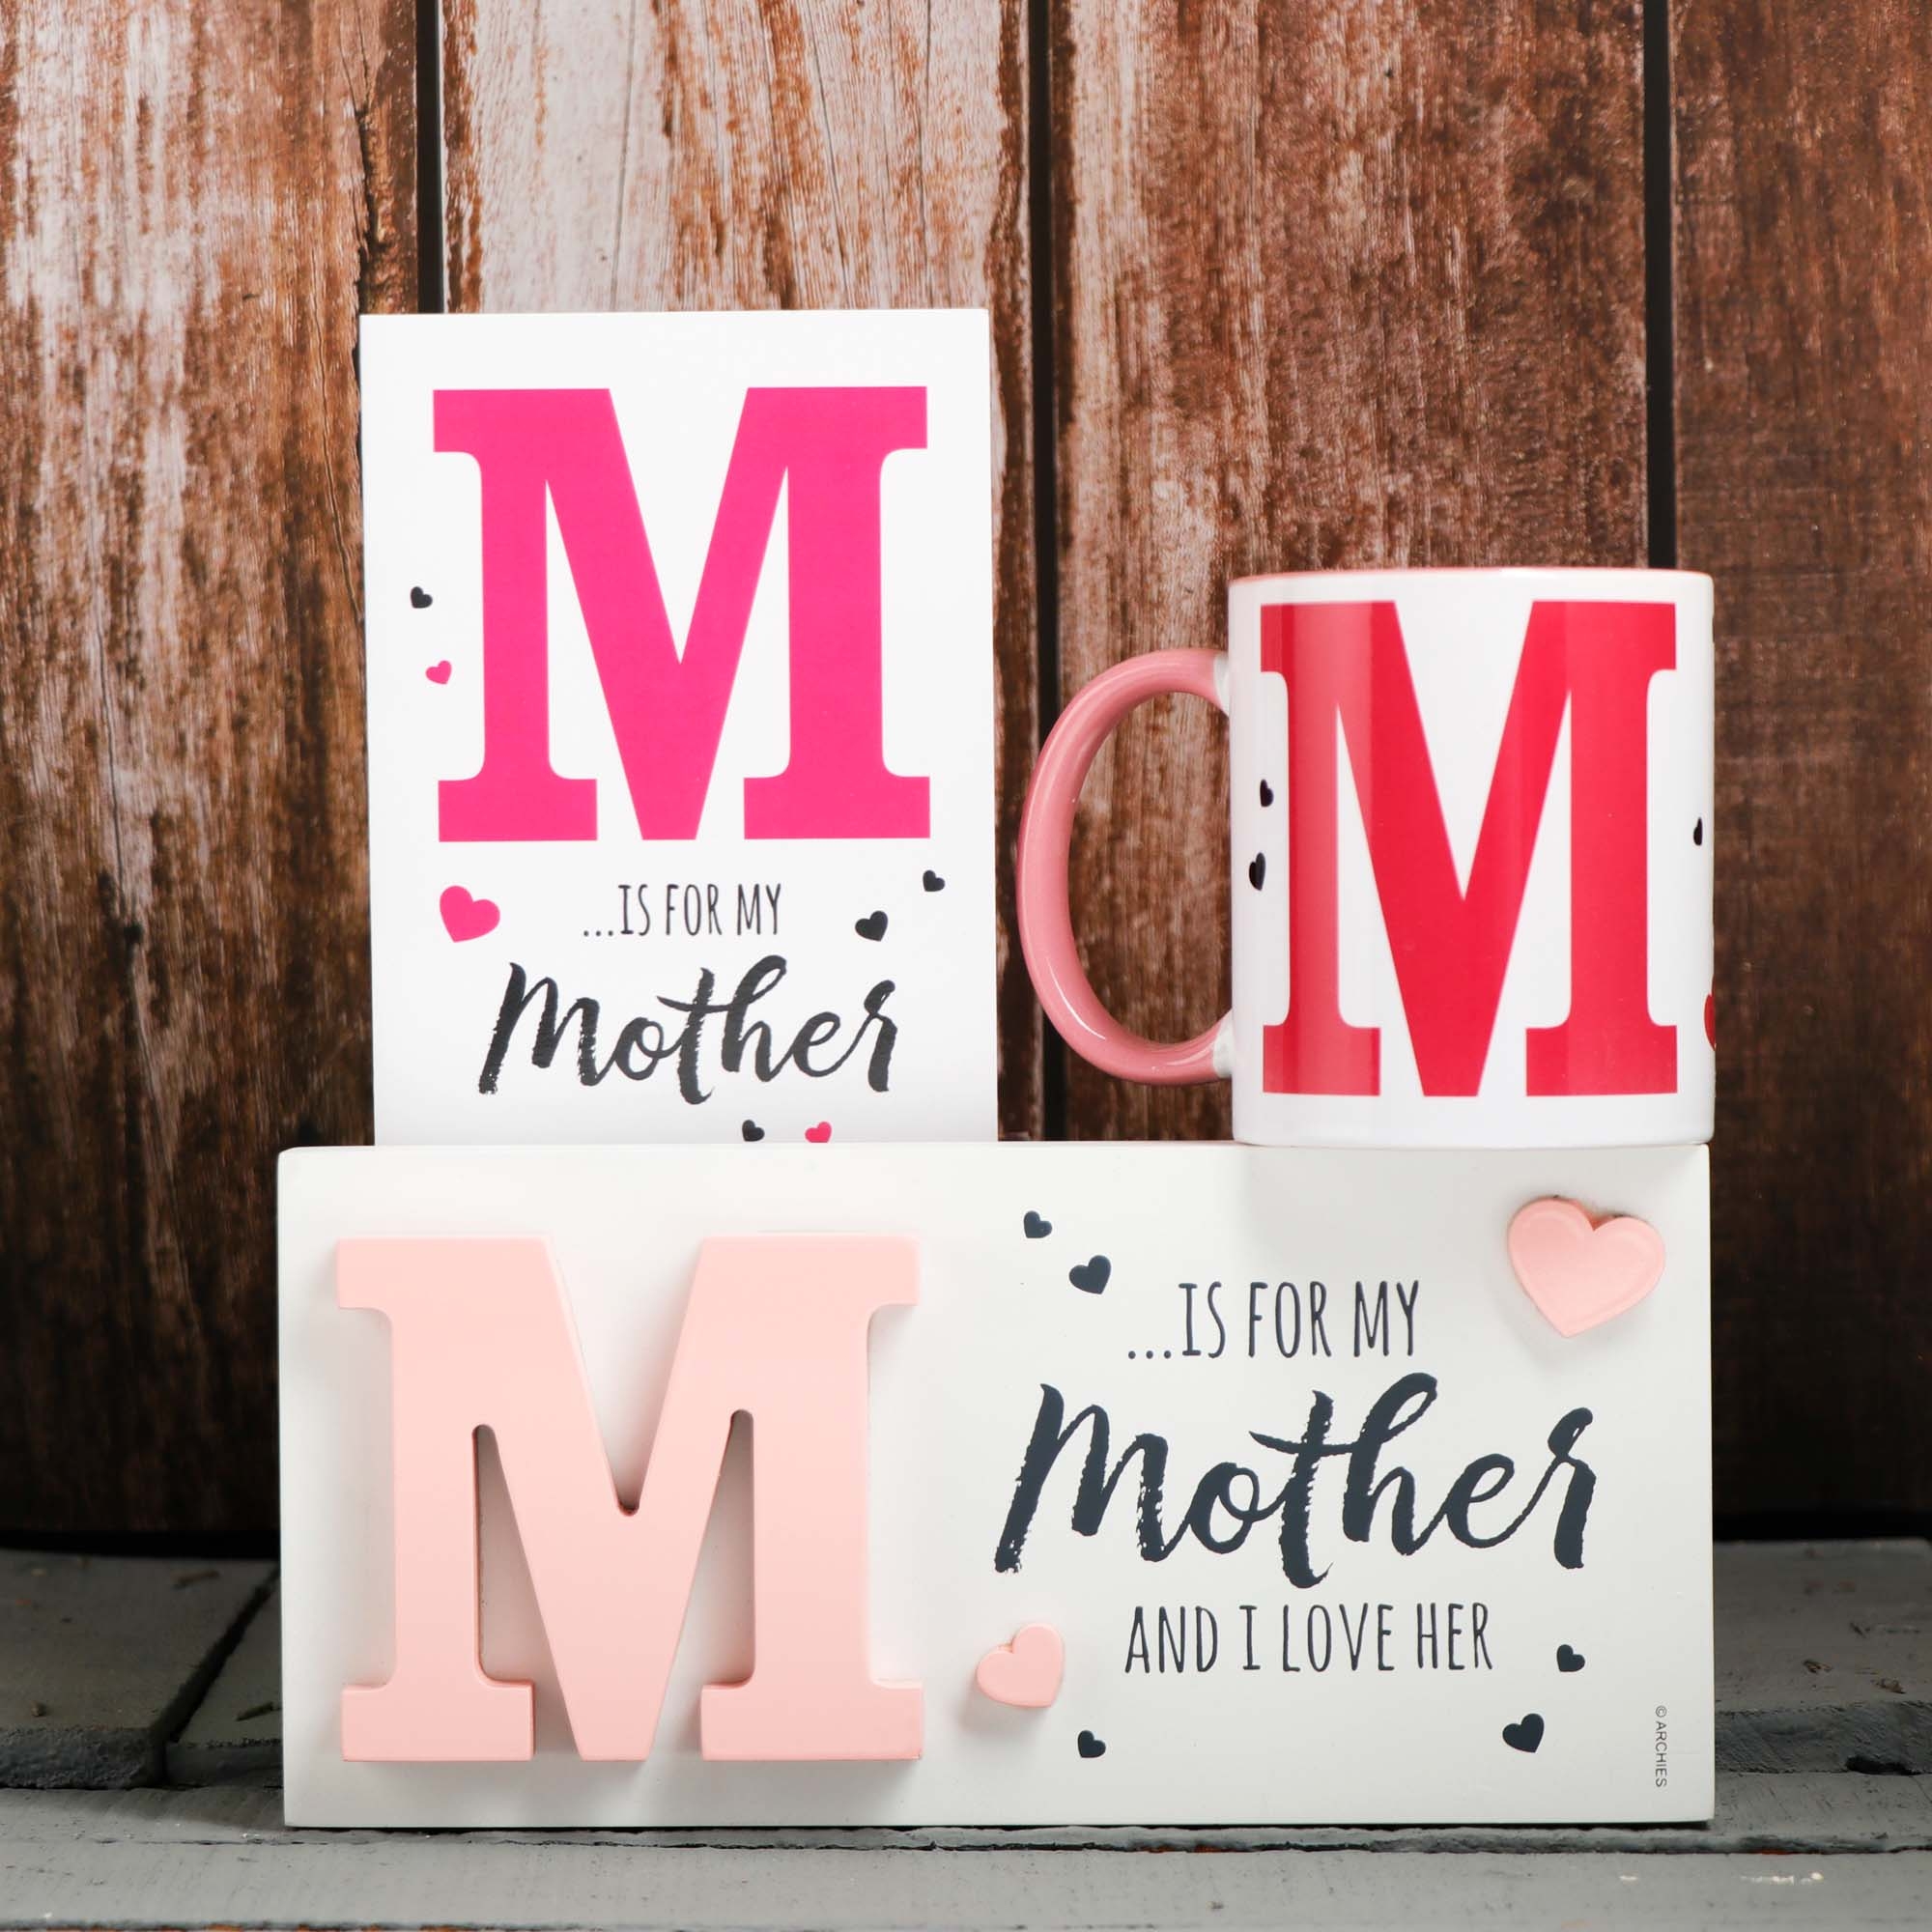 Archies KEEP SAKE Mother's Day Gift Combo with Ceramic Mug and Elevated Initial Quotation - with a FREE GREETING CARD